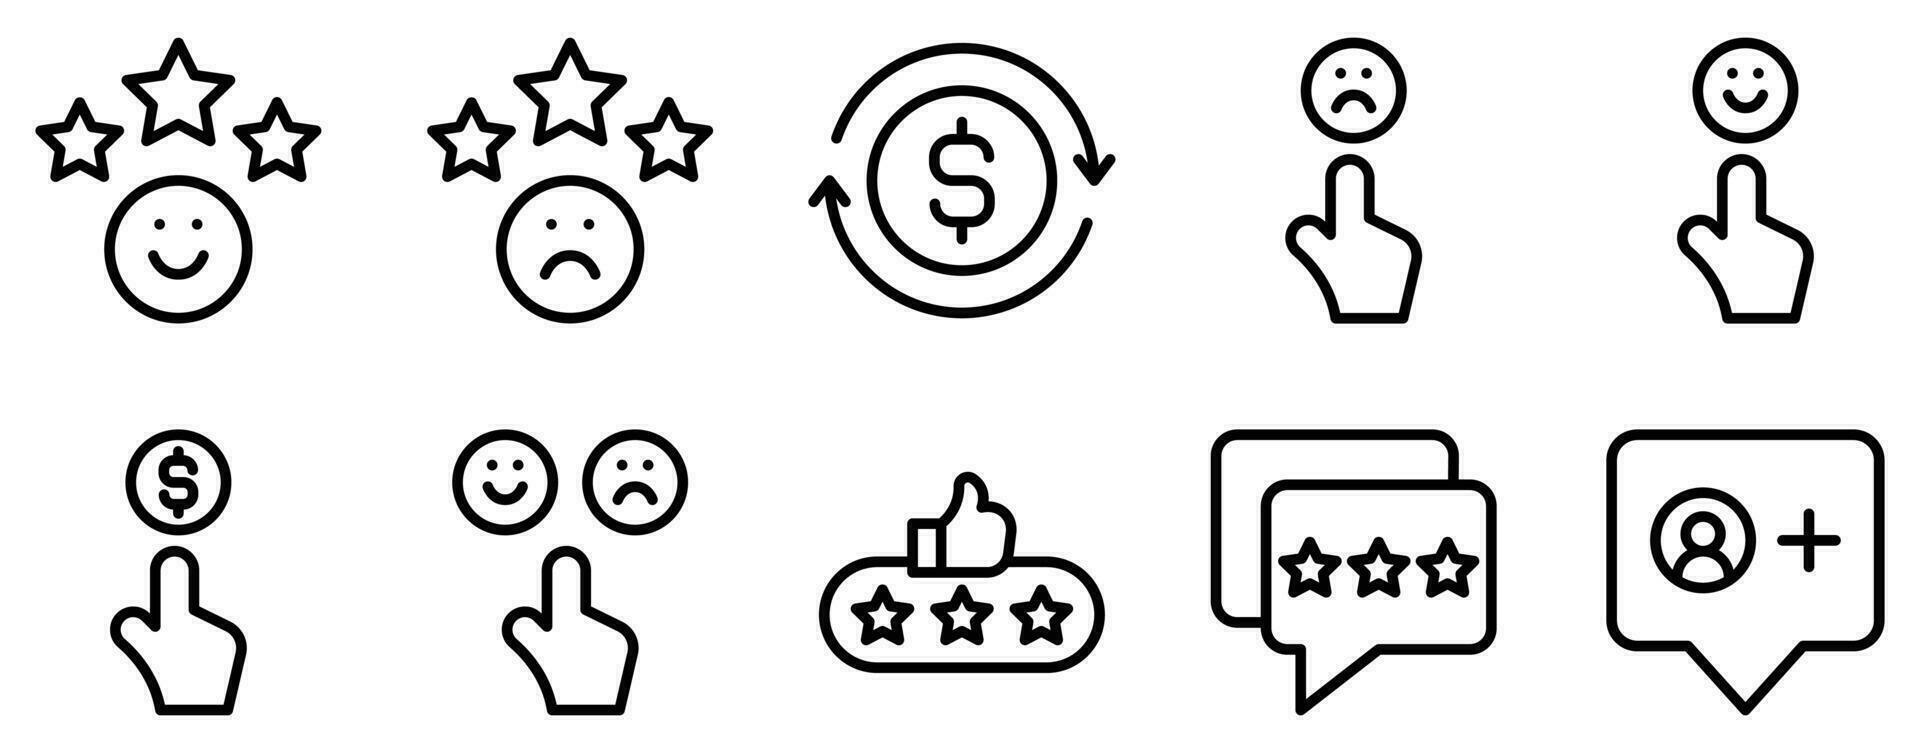 customer experience line style icon set collection vector